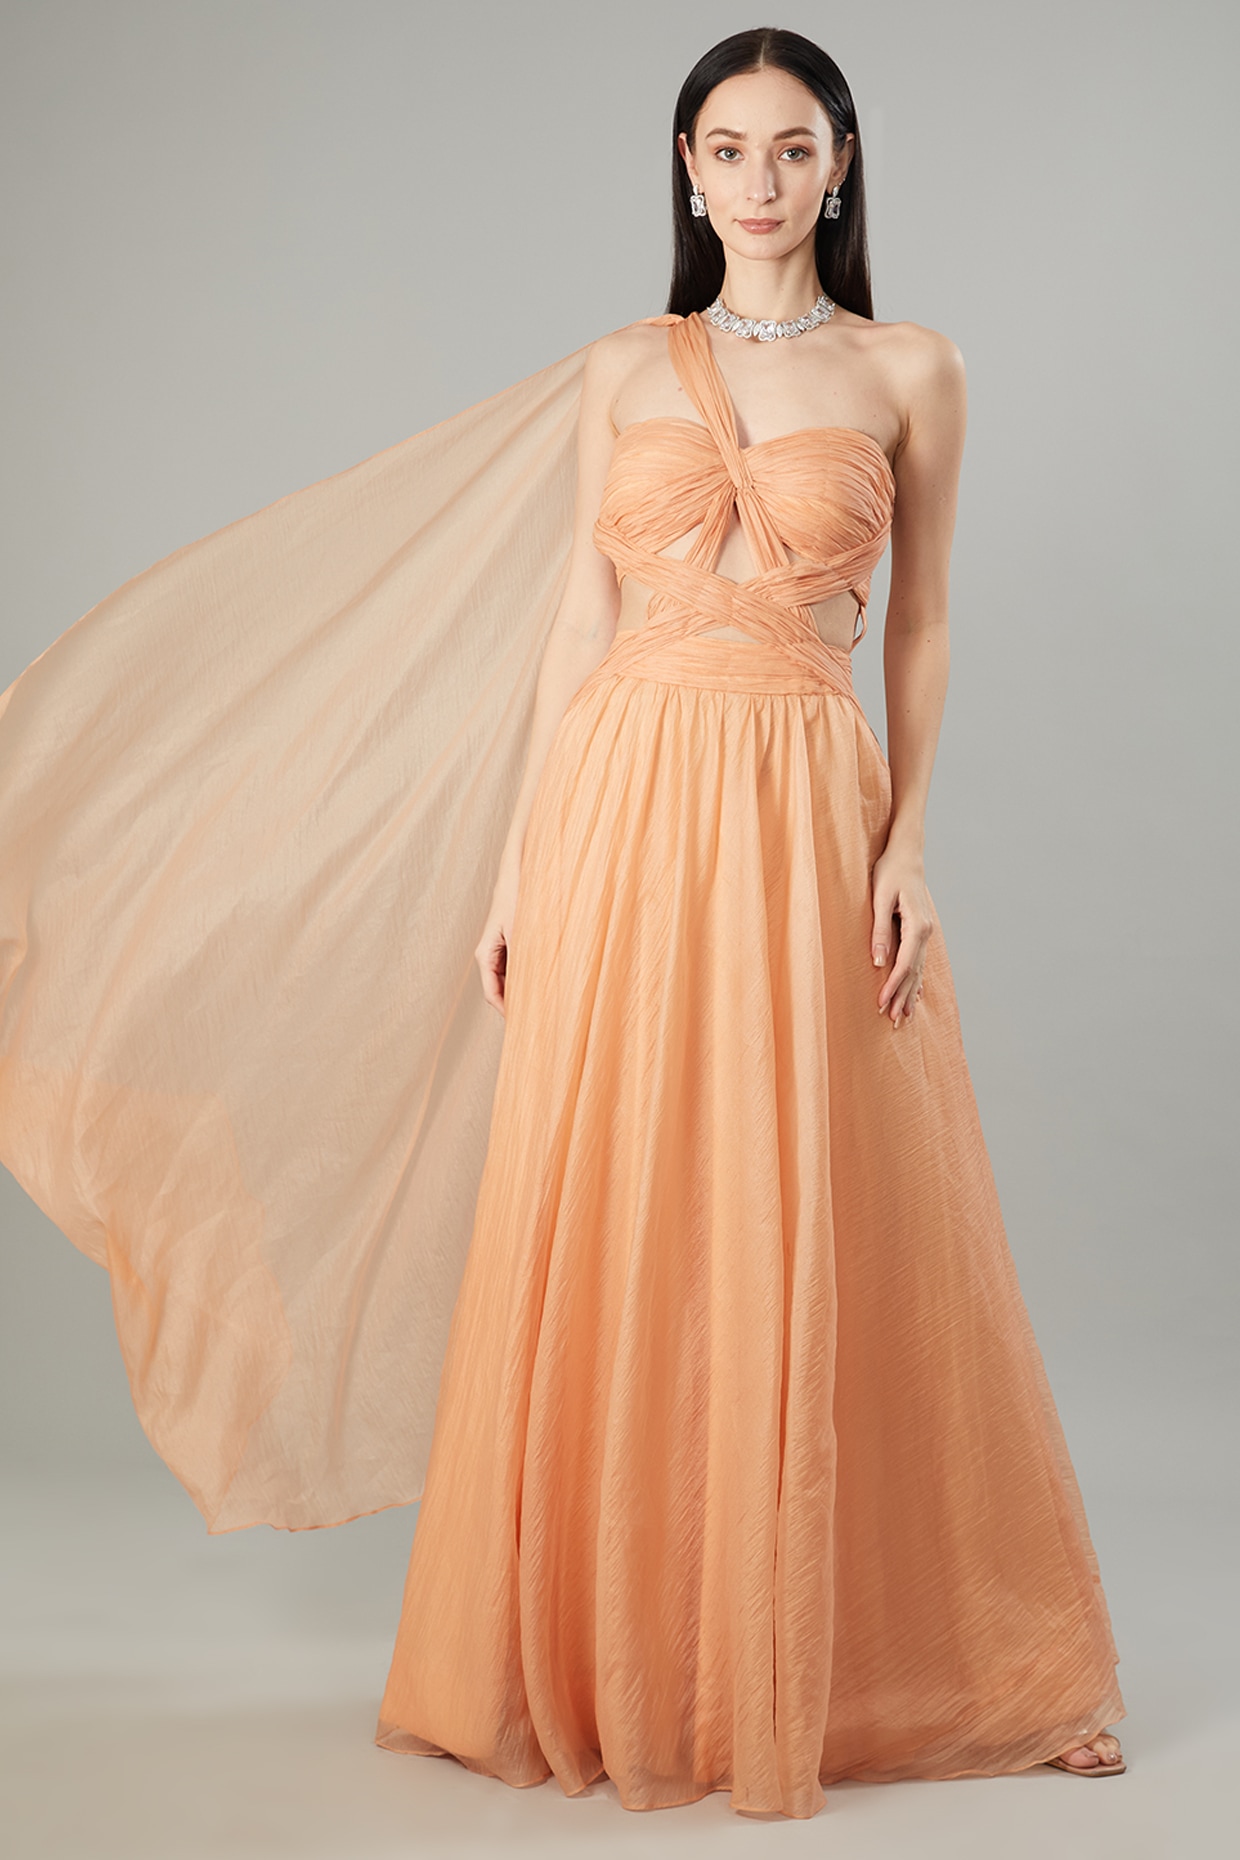 Buy Vivek party wear peach color gown Online at Best Prices in India -  JioMart.